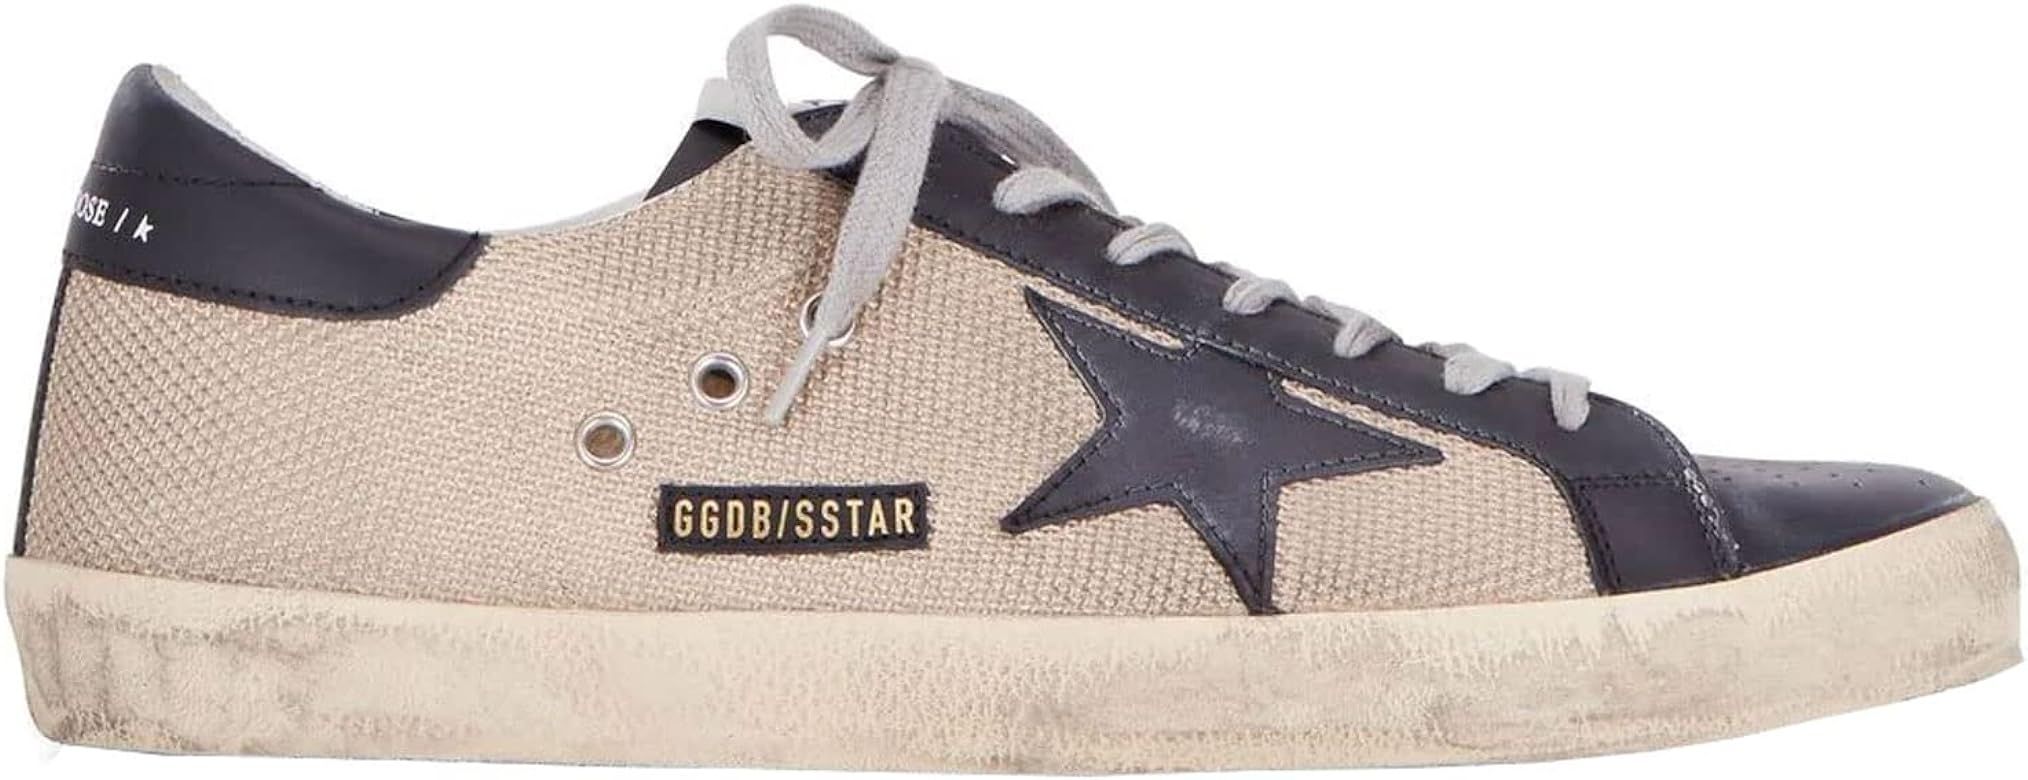 Golden Goose Super-Star Net Upper Leather Toe Lacing Star and Heel Mens Sneakers | Amazon (US)